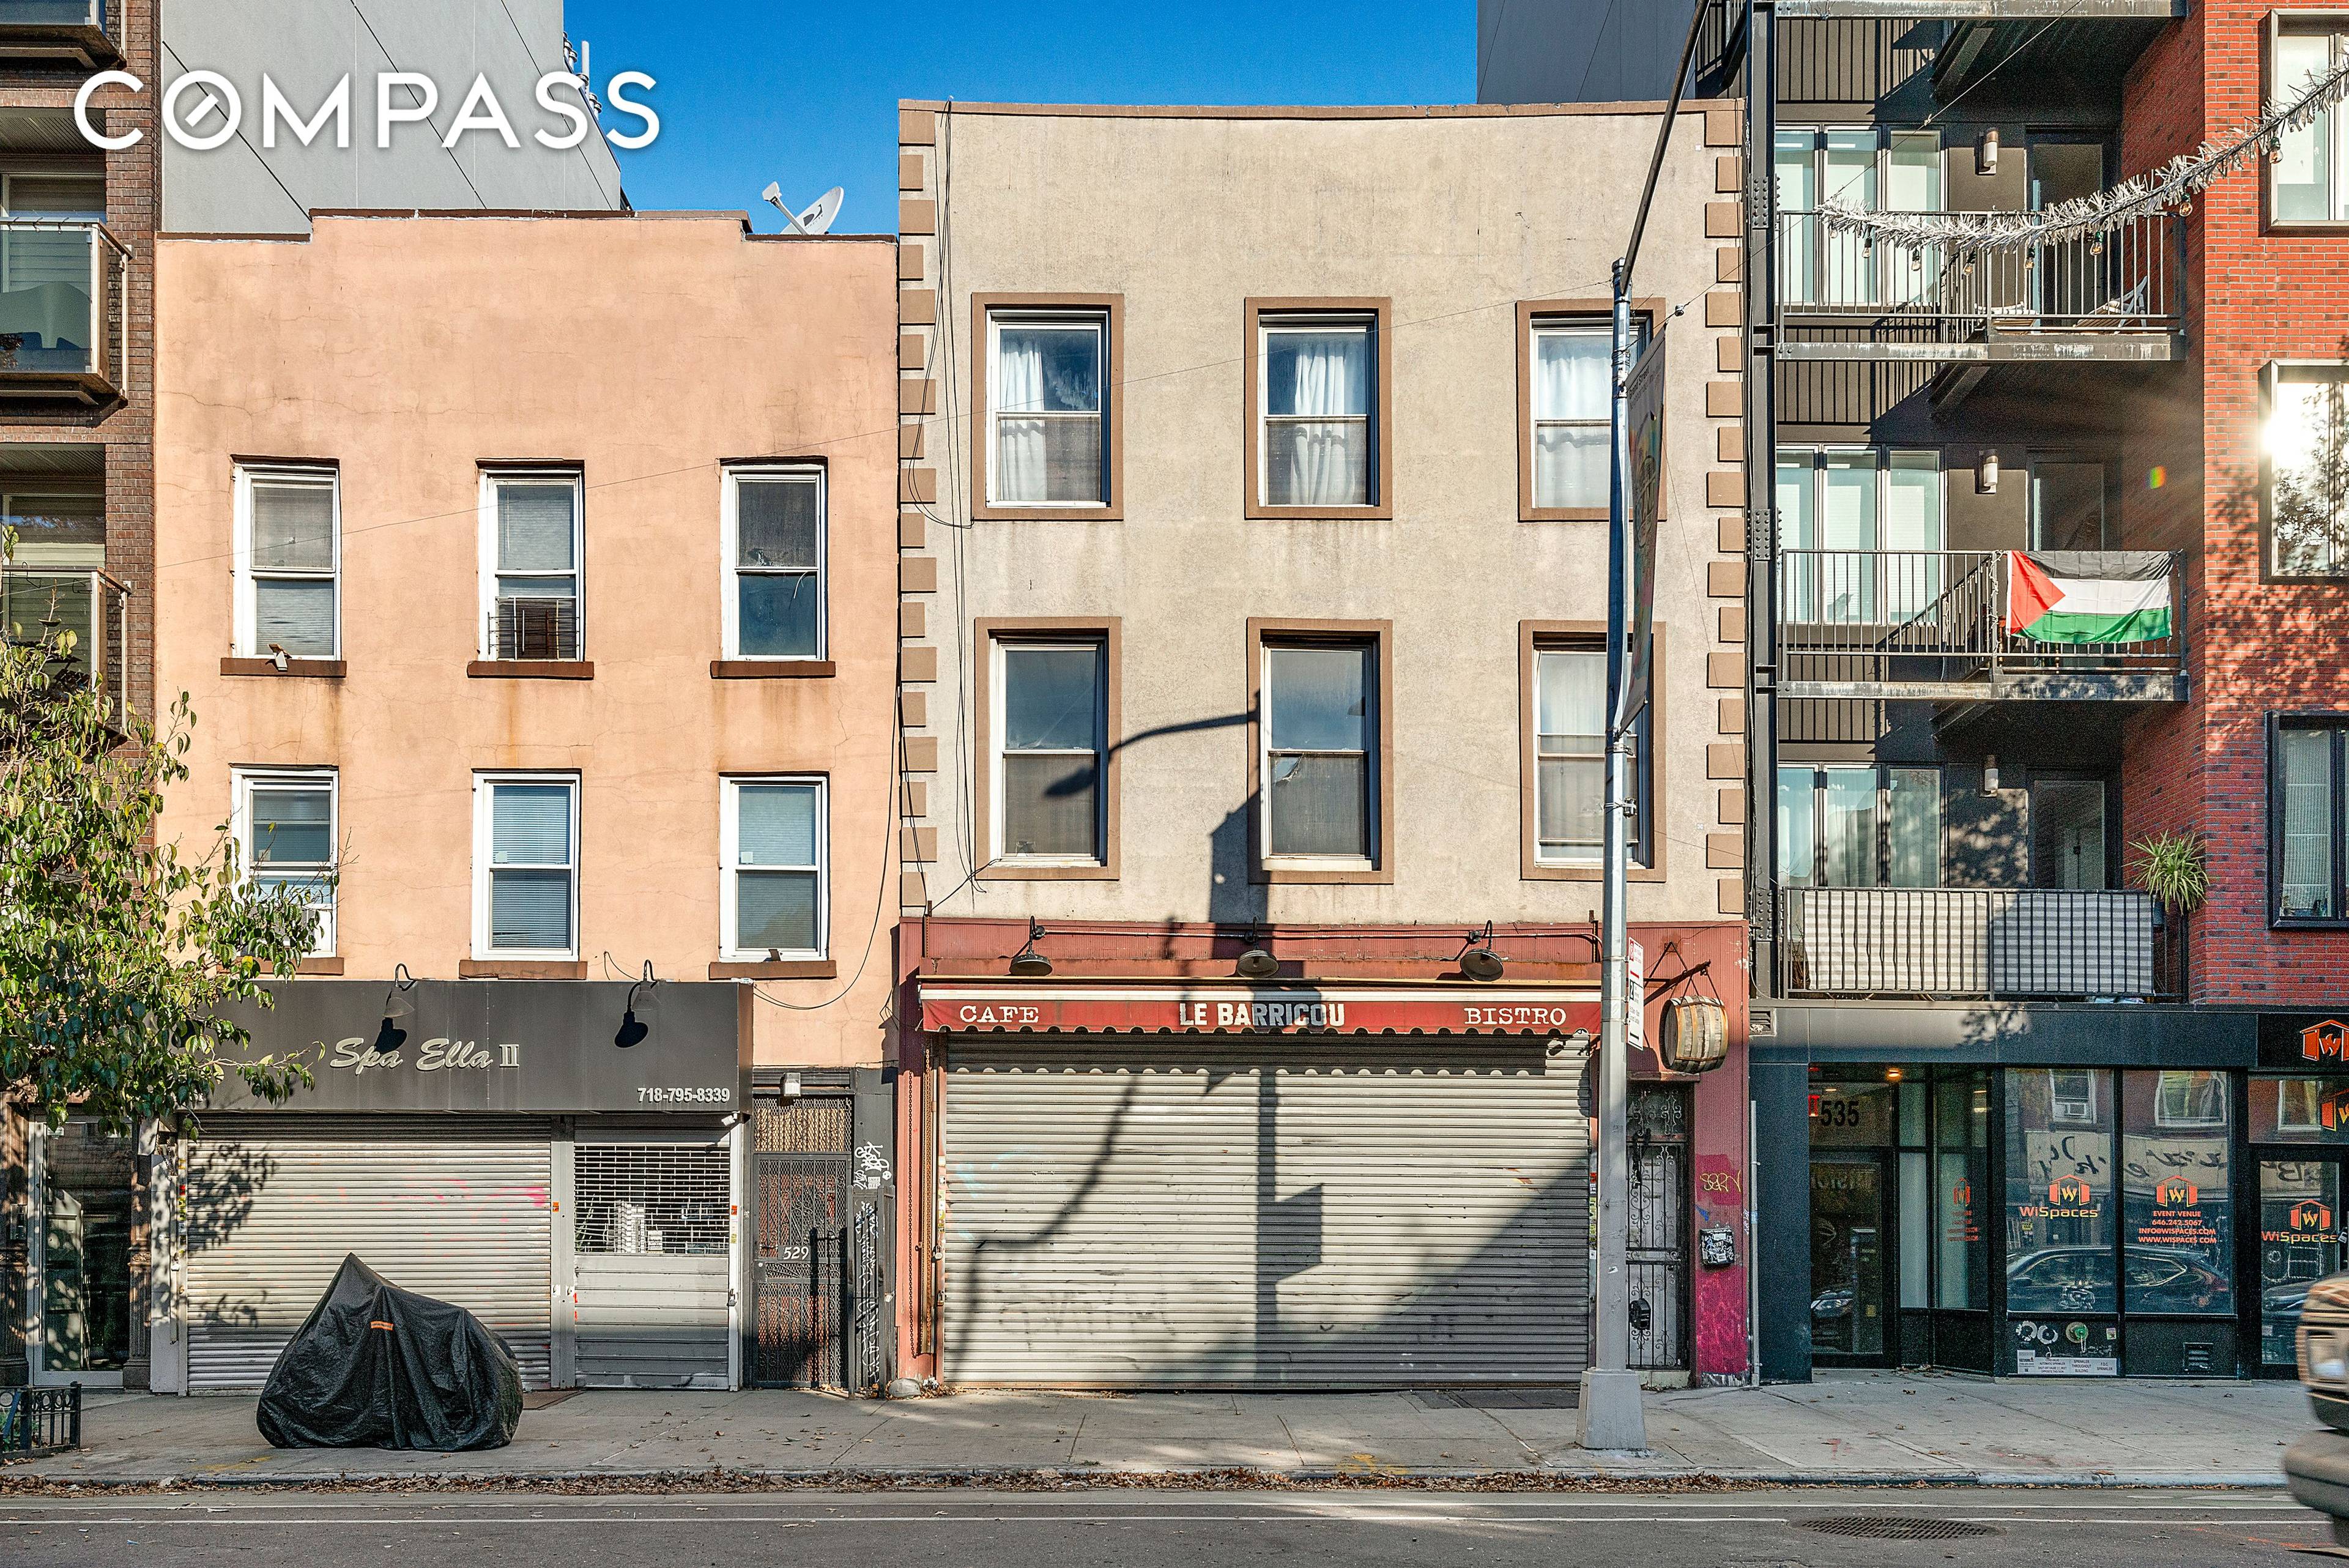 Located In Prime Williamsburg, this unique development opportunity is situated between Union Avenue and Lorimer Street.